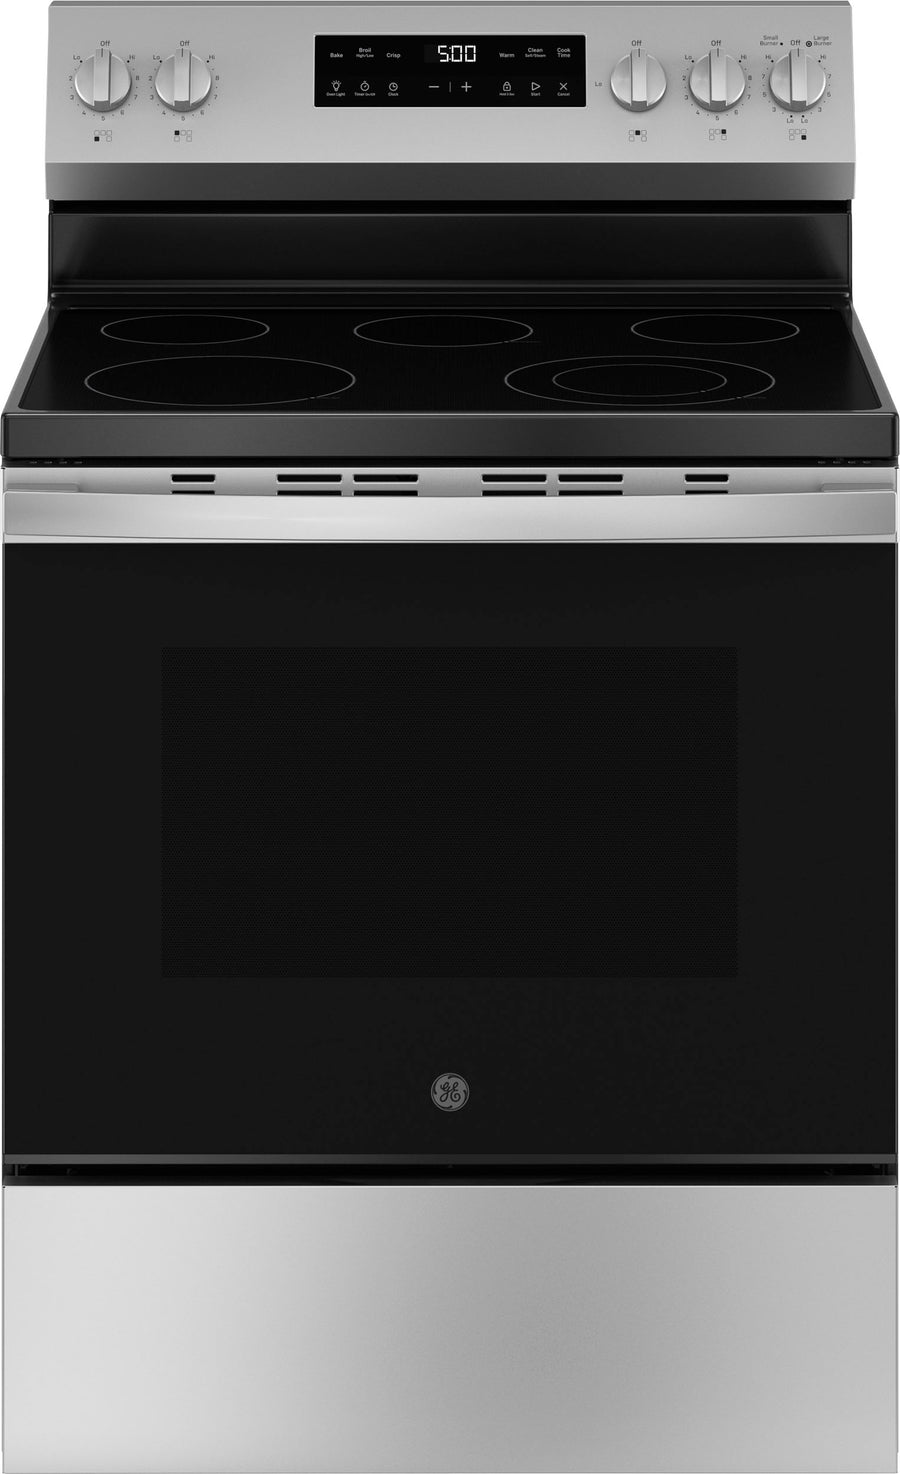 GE - 5.3 Cu. Ft. Freestanding Electric Range with Self-Clean and Steam Cleaning Option and Crisp Mode - Stainless Steel_0